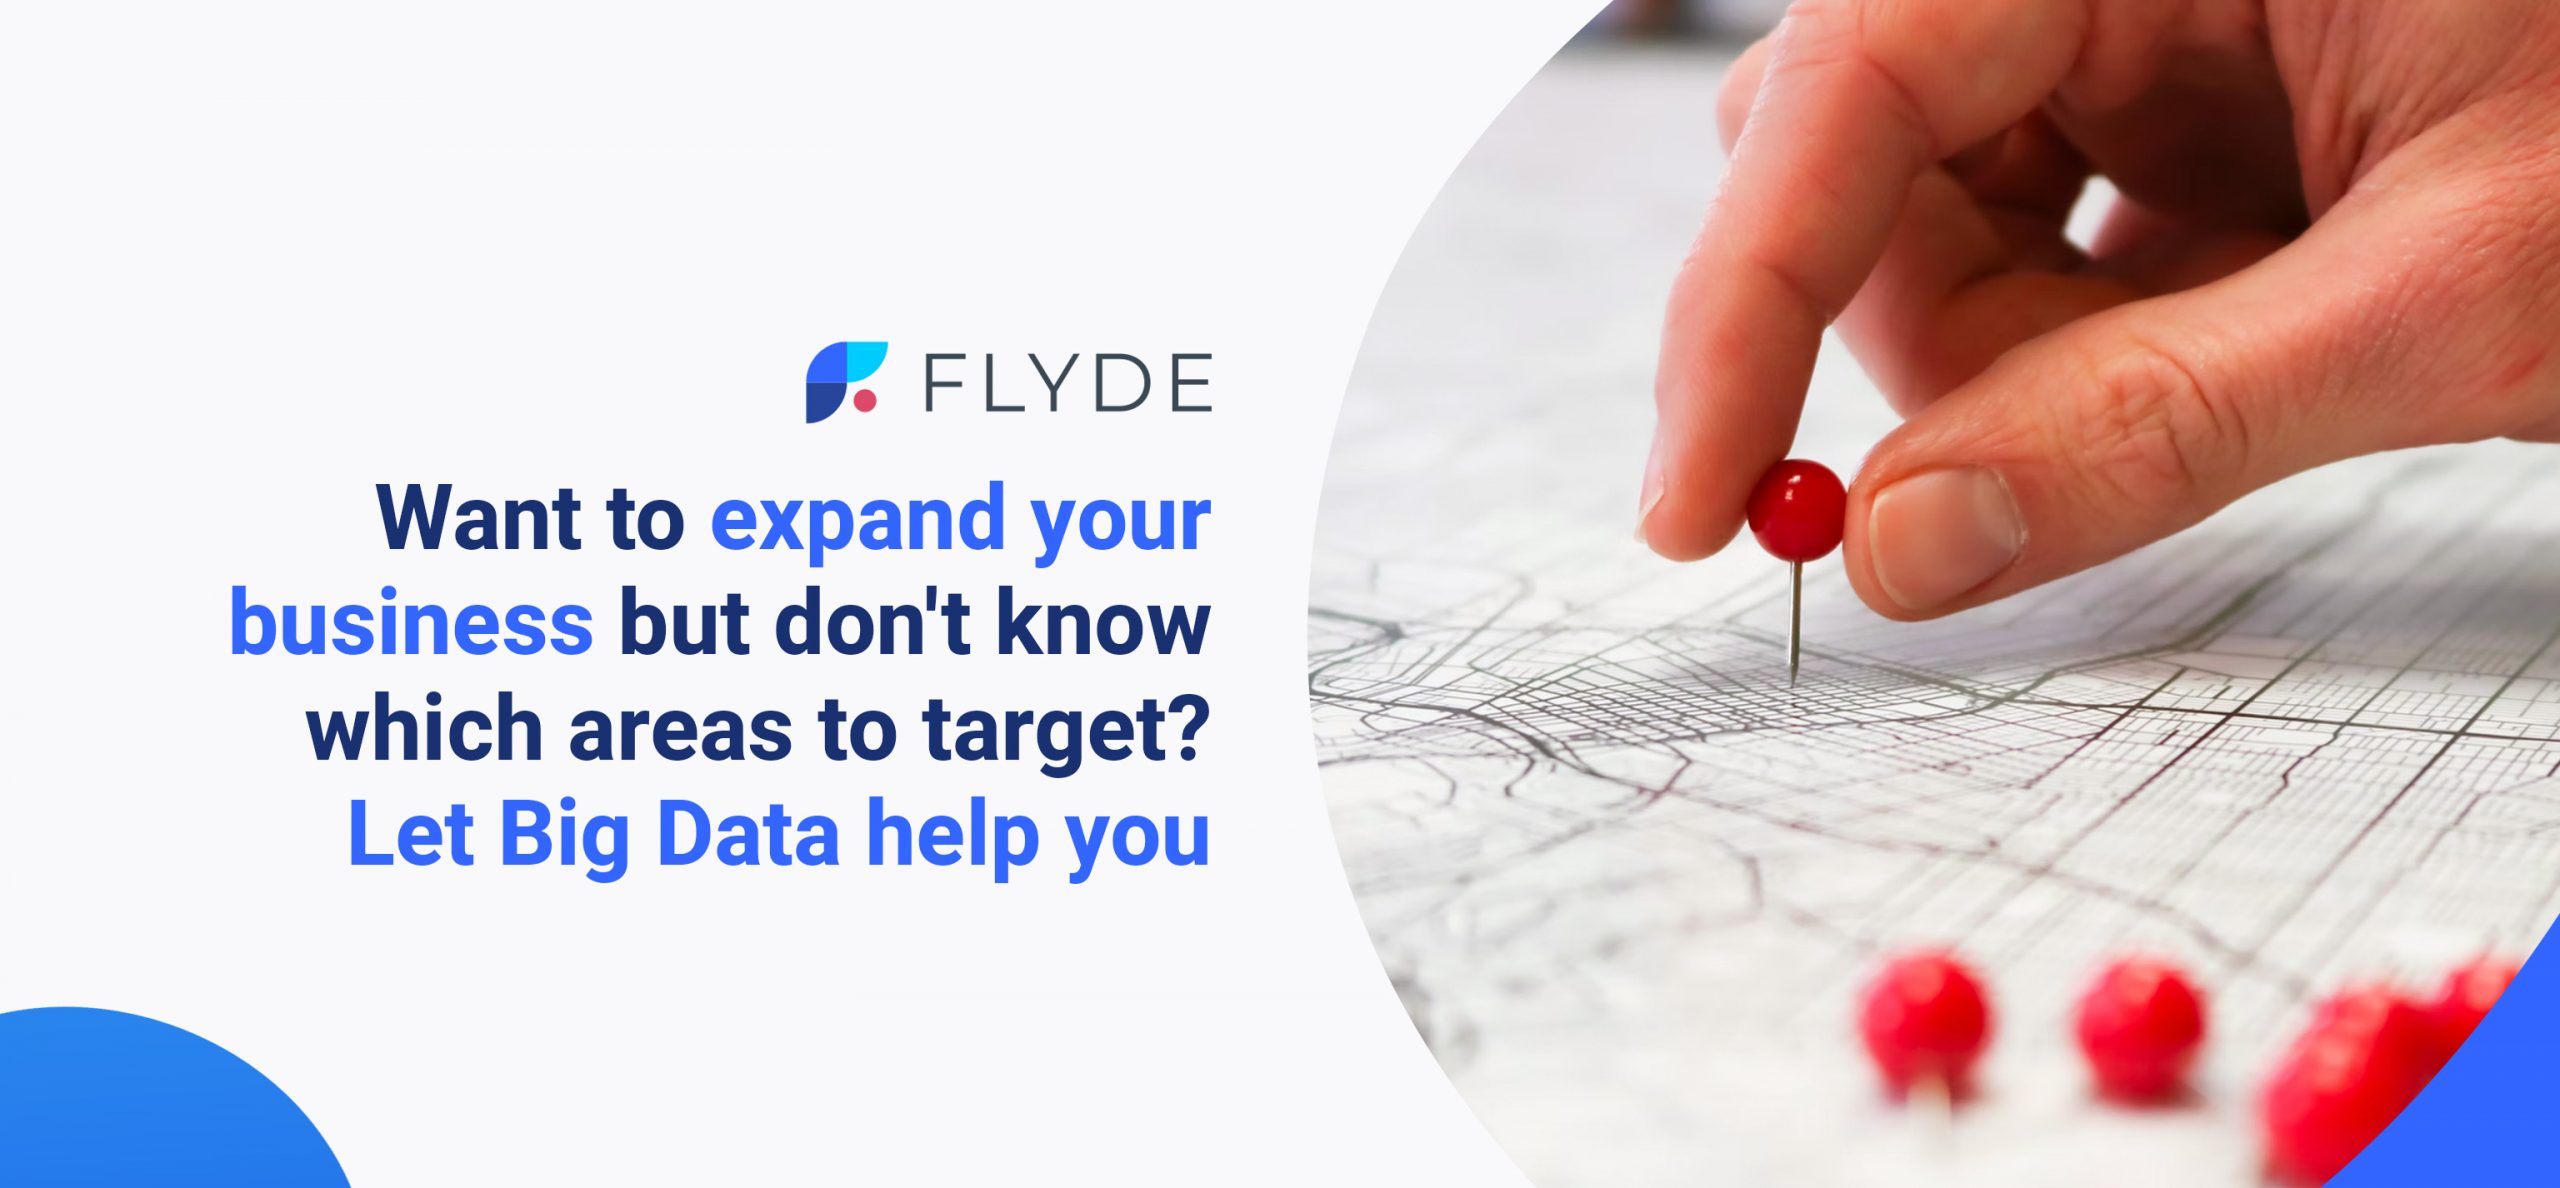 Want to expand your business but don't know which areas to target? Let Big Data help you